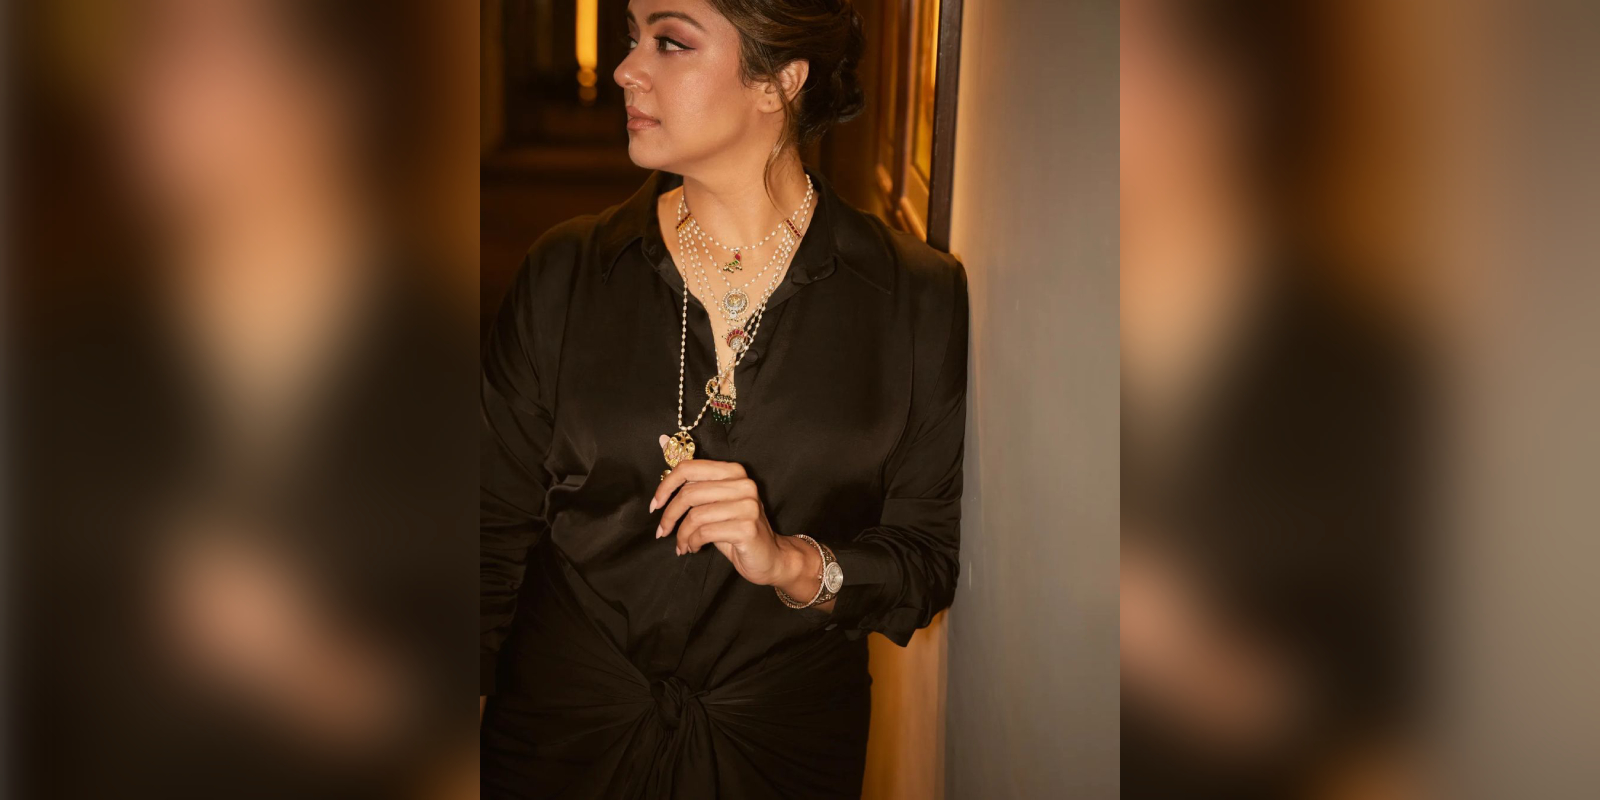 Jyothika in a stunning Black outfit